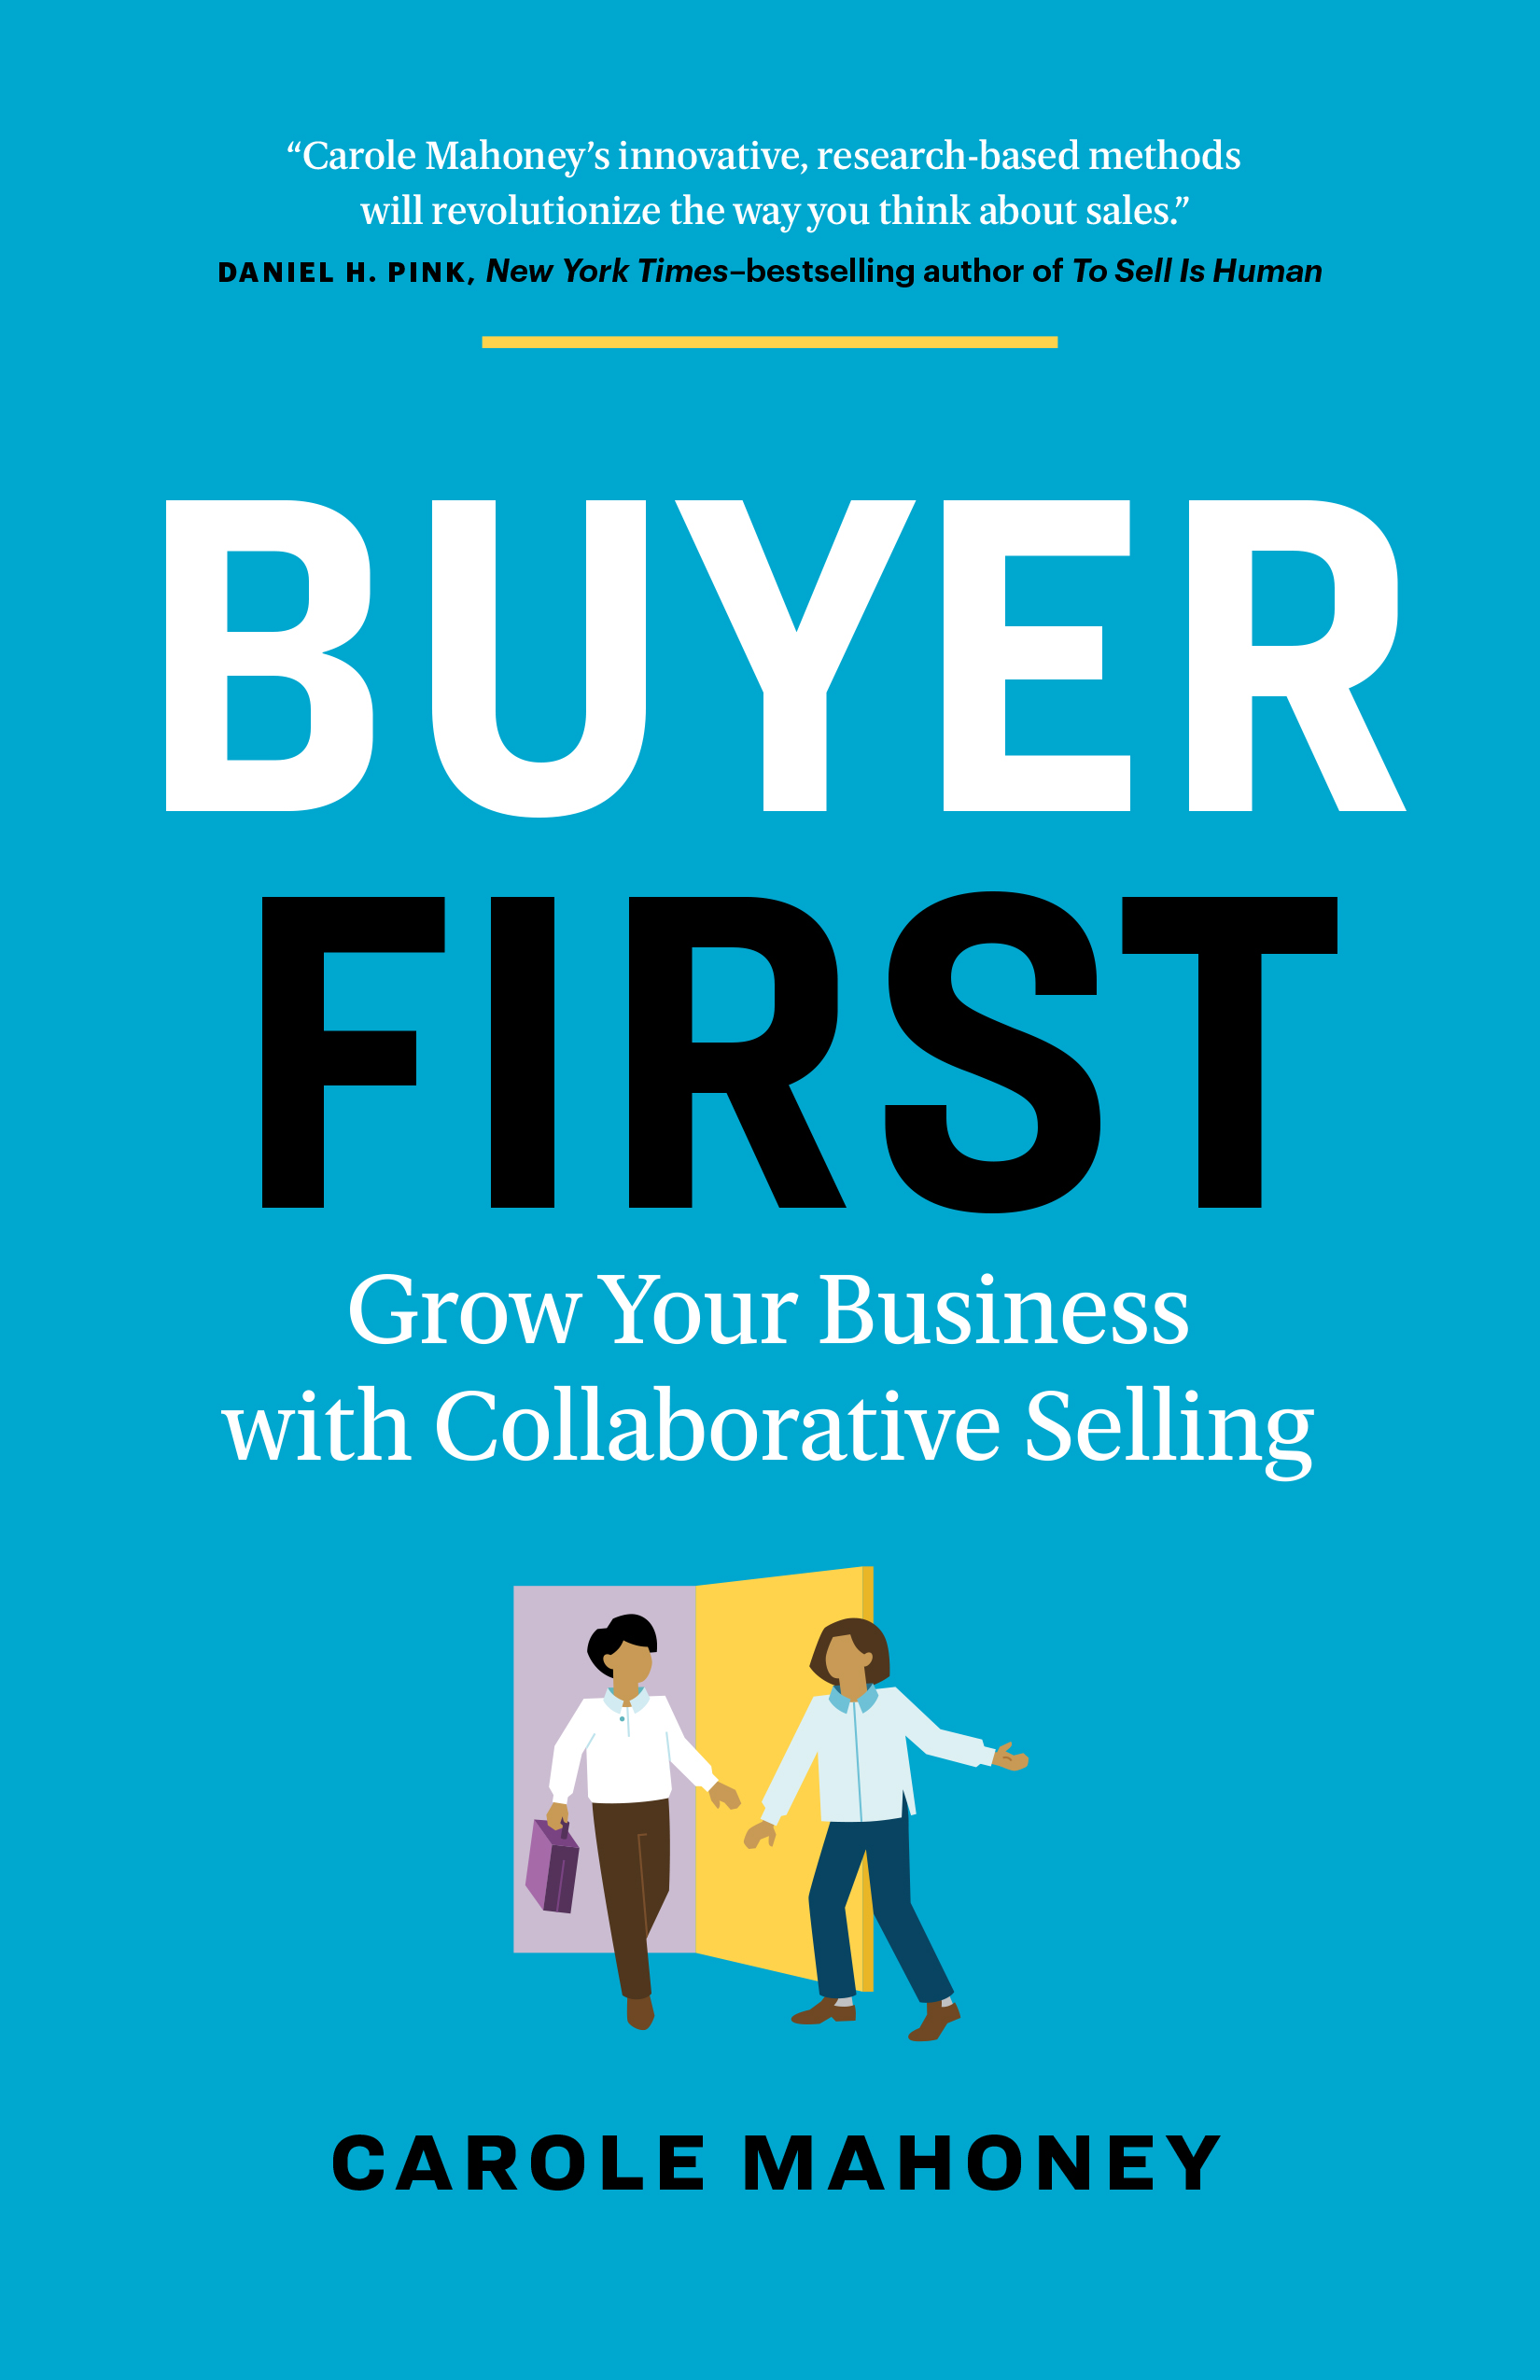 Buyer First by Carole Mahoney